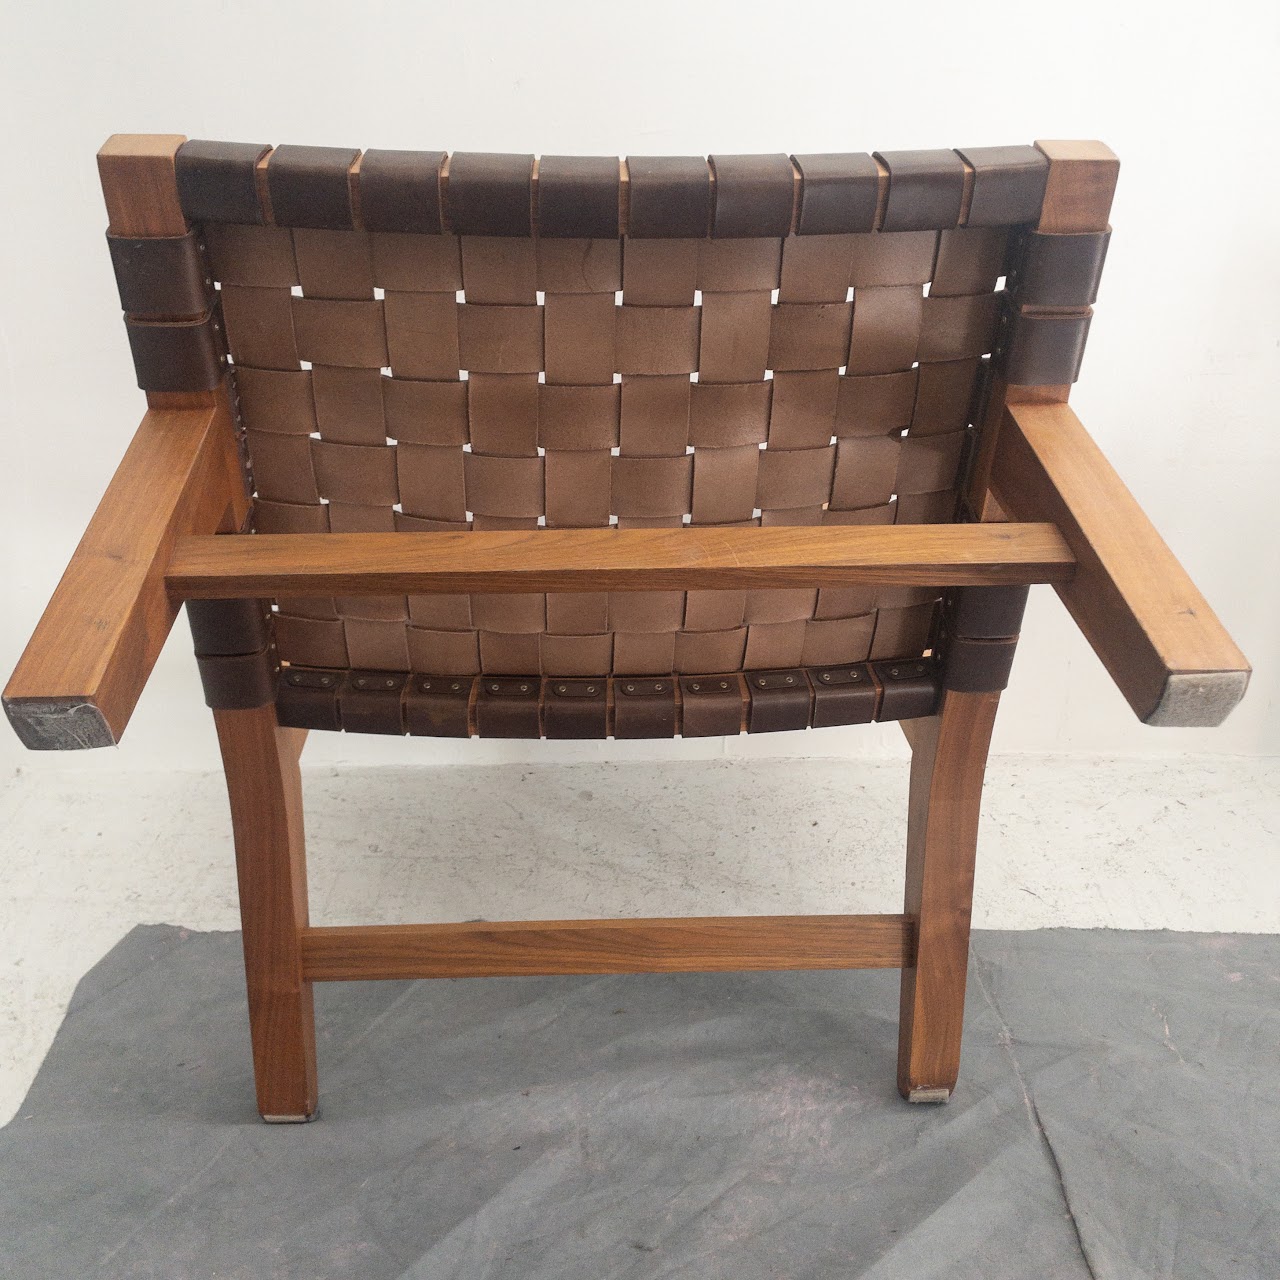 Leather Lounge Chair Pair